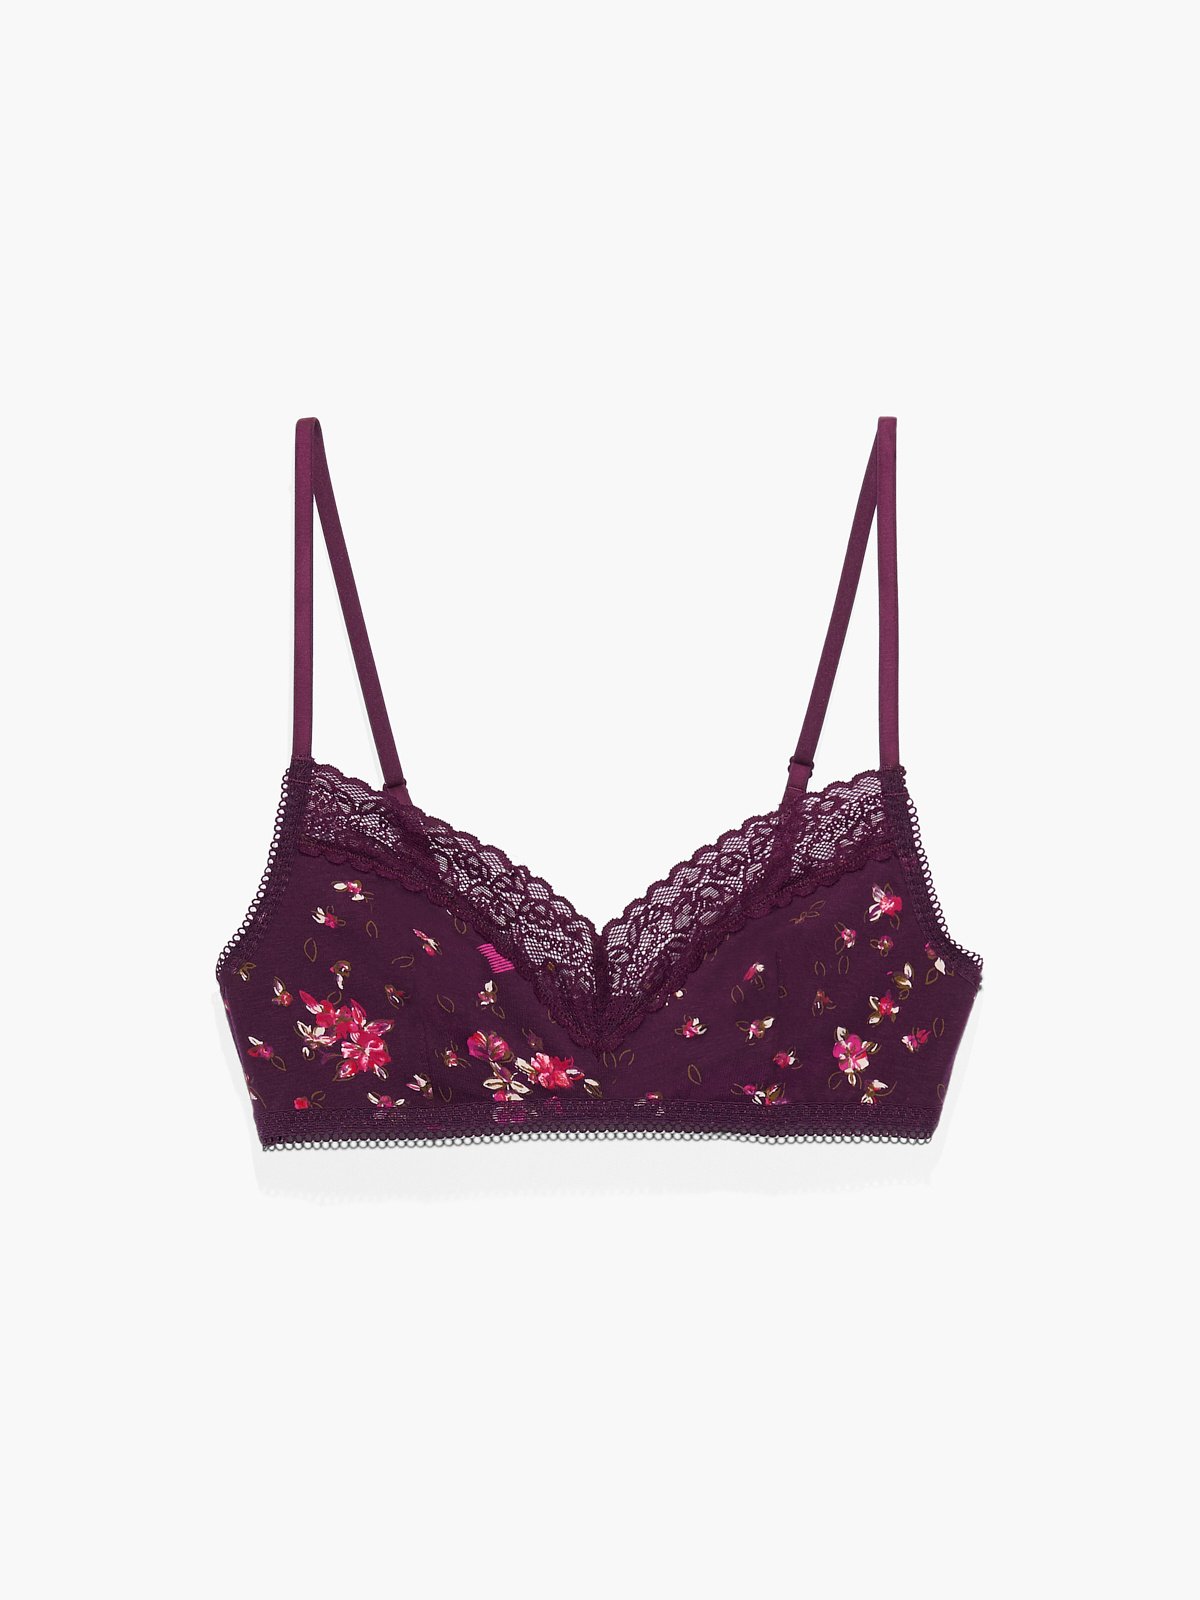 Savage X Fenty cotton candy bad gal doodle print bralette size small … -  $24 - From Stylish